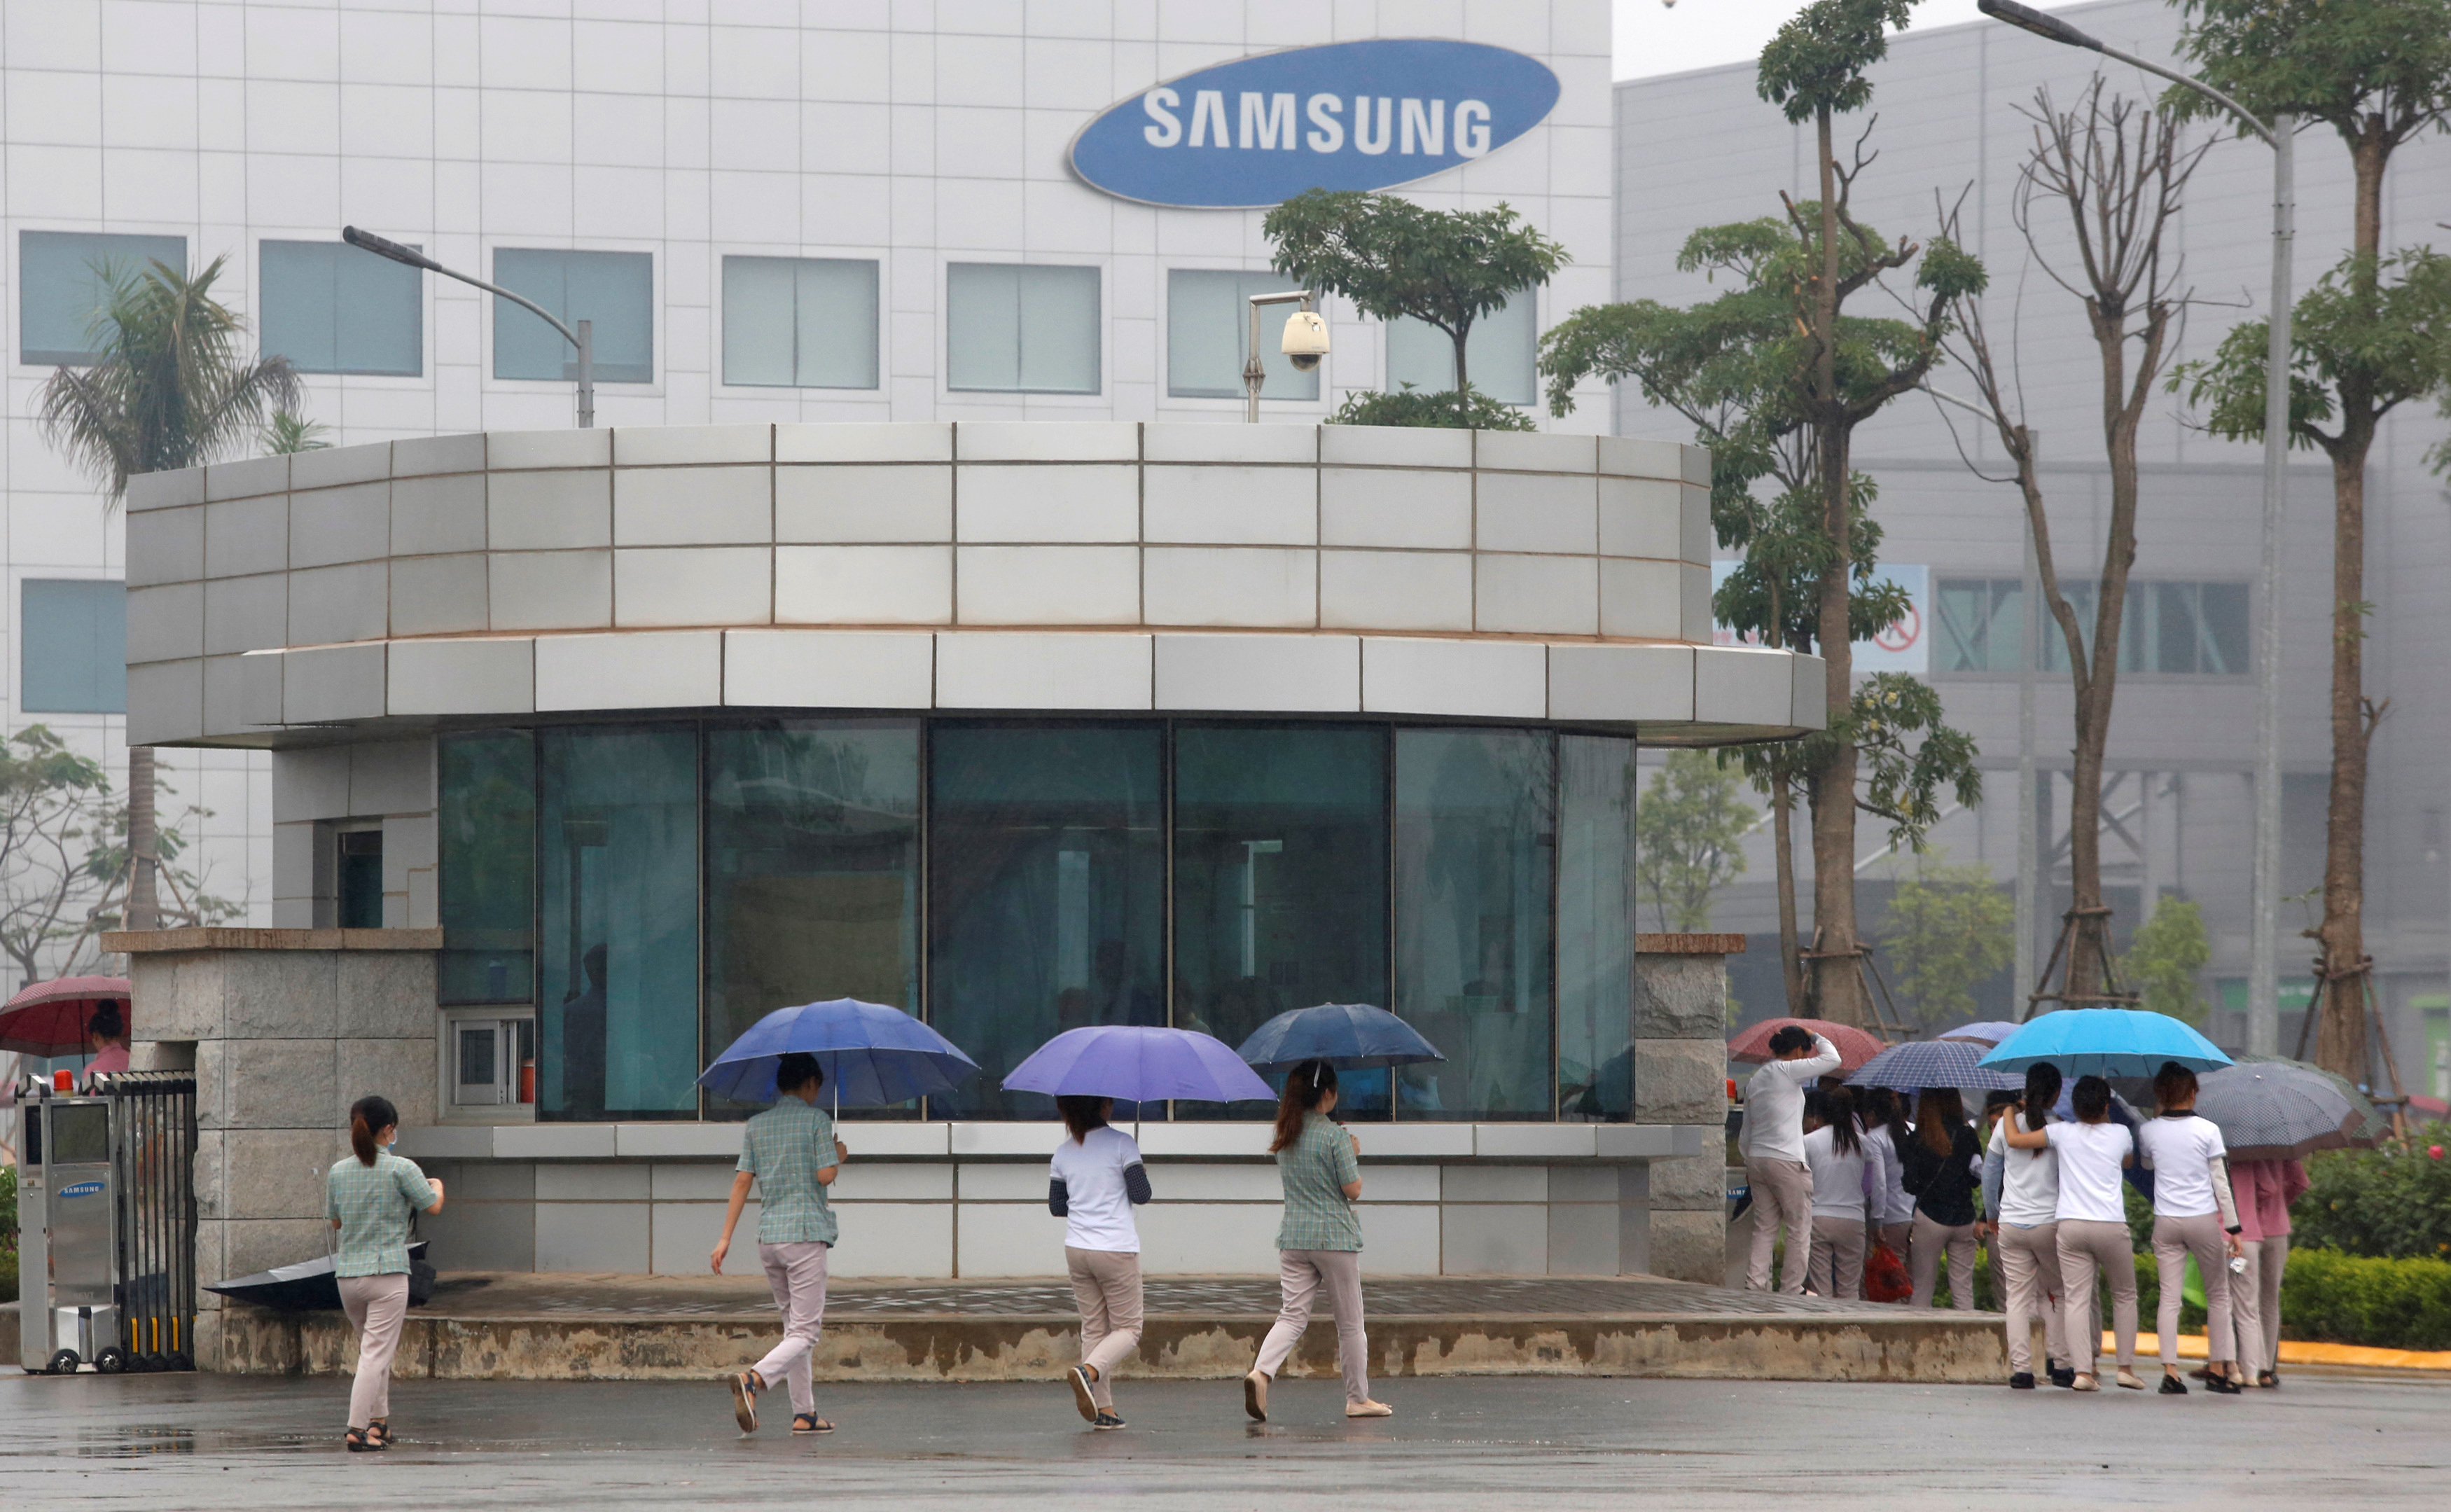 Workers make their way to work at a Samsung factory in Thai Nguyen province, north of Hanoi, Vietnam